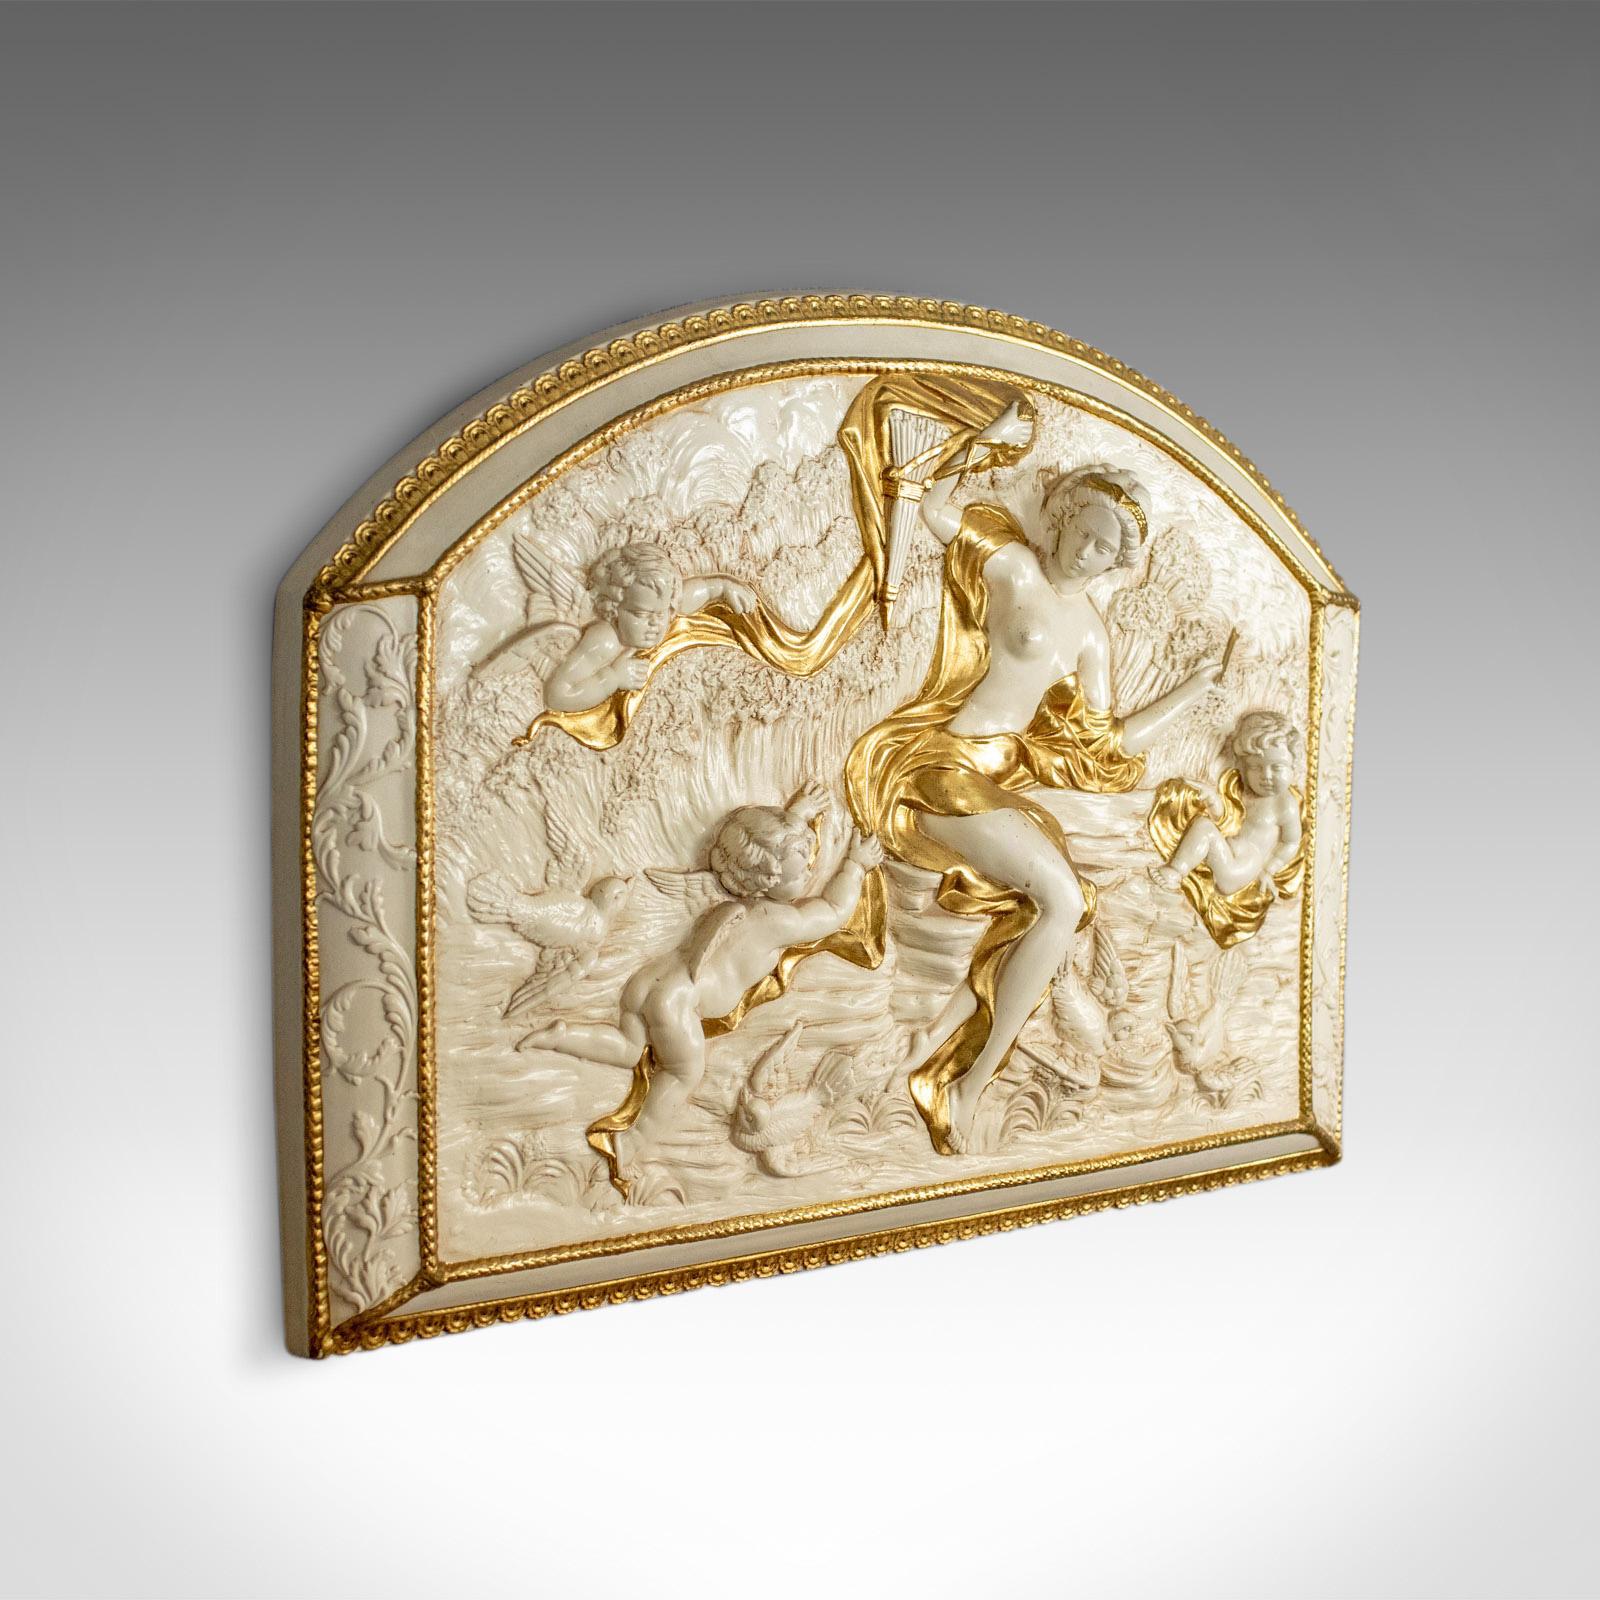 This is a decorative panel, a plaster relief of a female with putti highlighted in gold. A plaque dating to the late 20th century.

Beautifully detailed plaster panel
Profusely decorated and highlighted in gold
Classical scene of a female